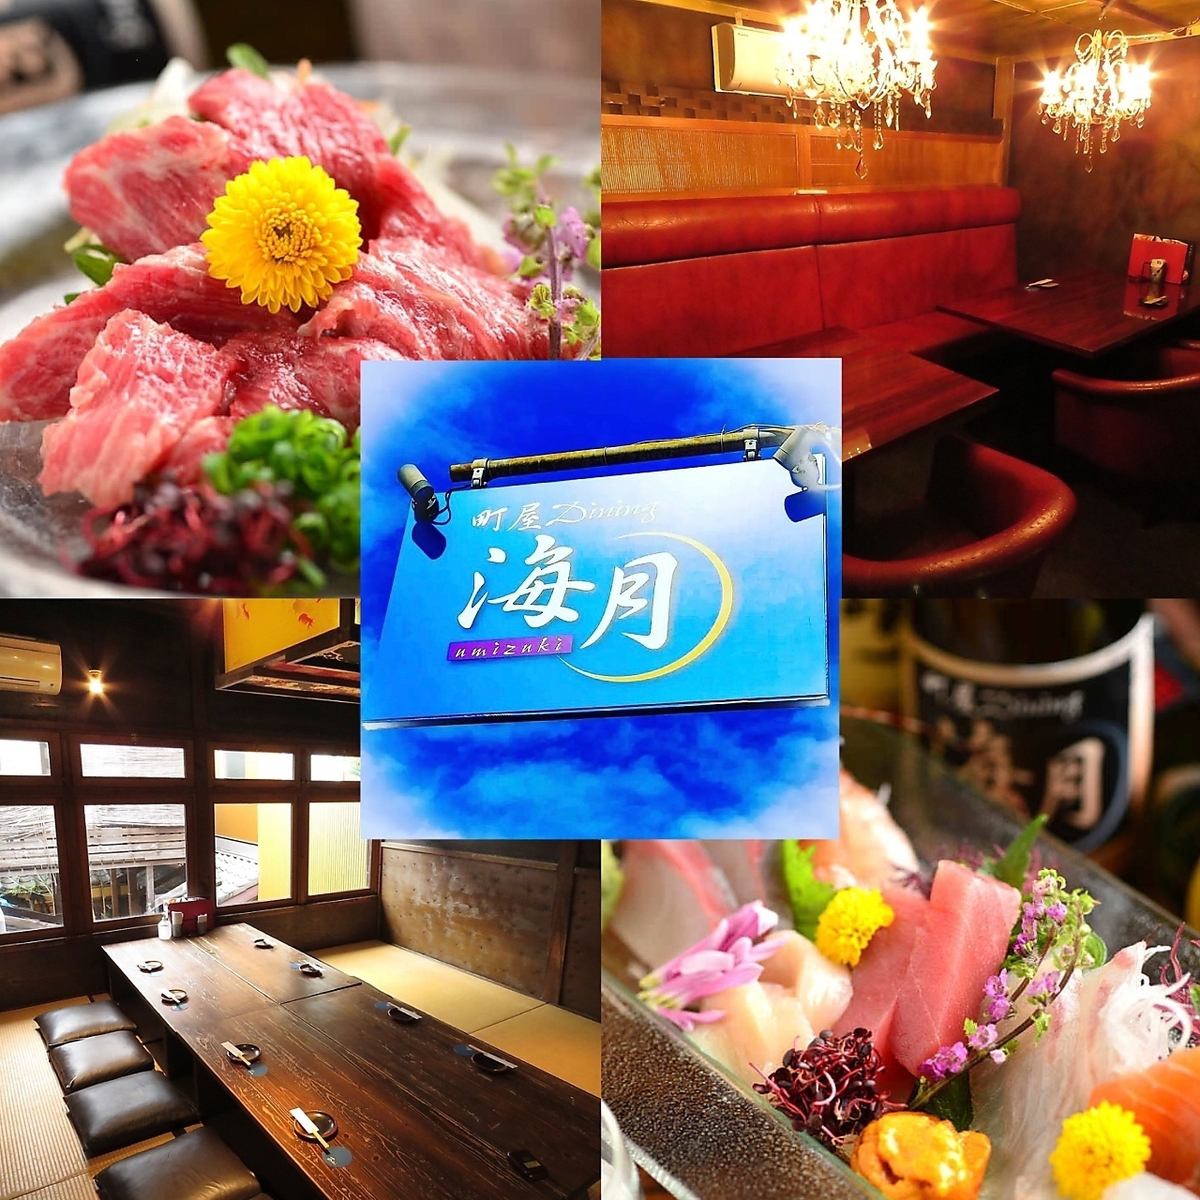 There is a safe and secure private room.Let's get excited with the individual serving course ♪